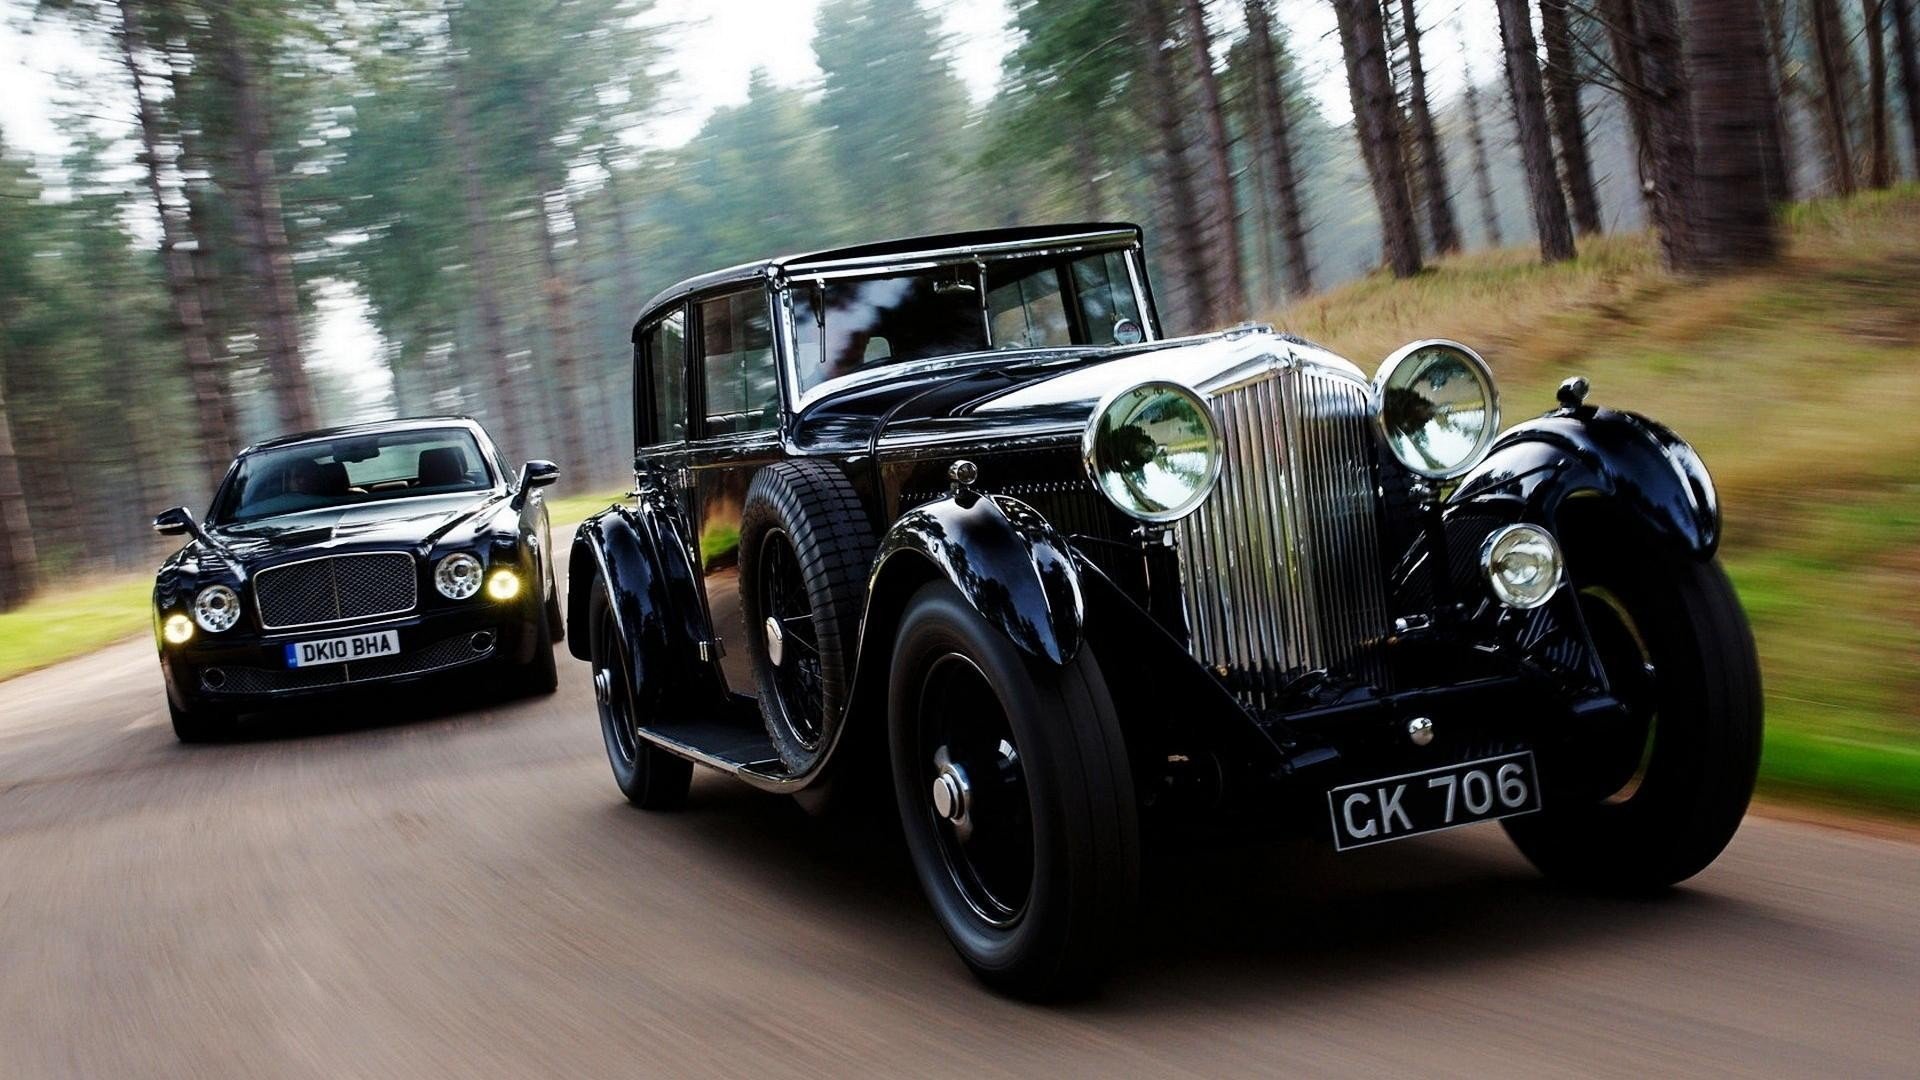 vehicle, Car, Old car, Classic car, Bentley, Bentley Mulsanne, Road, Trees, Forest, Motion blur Wallpaper